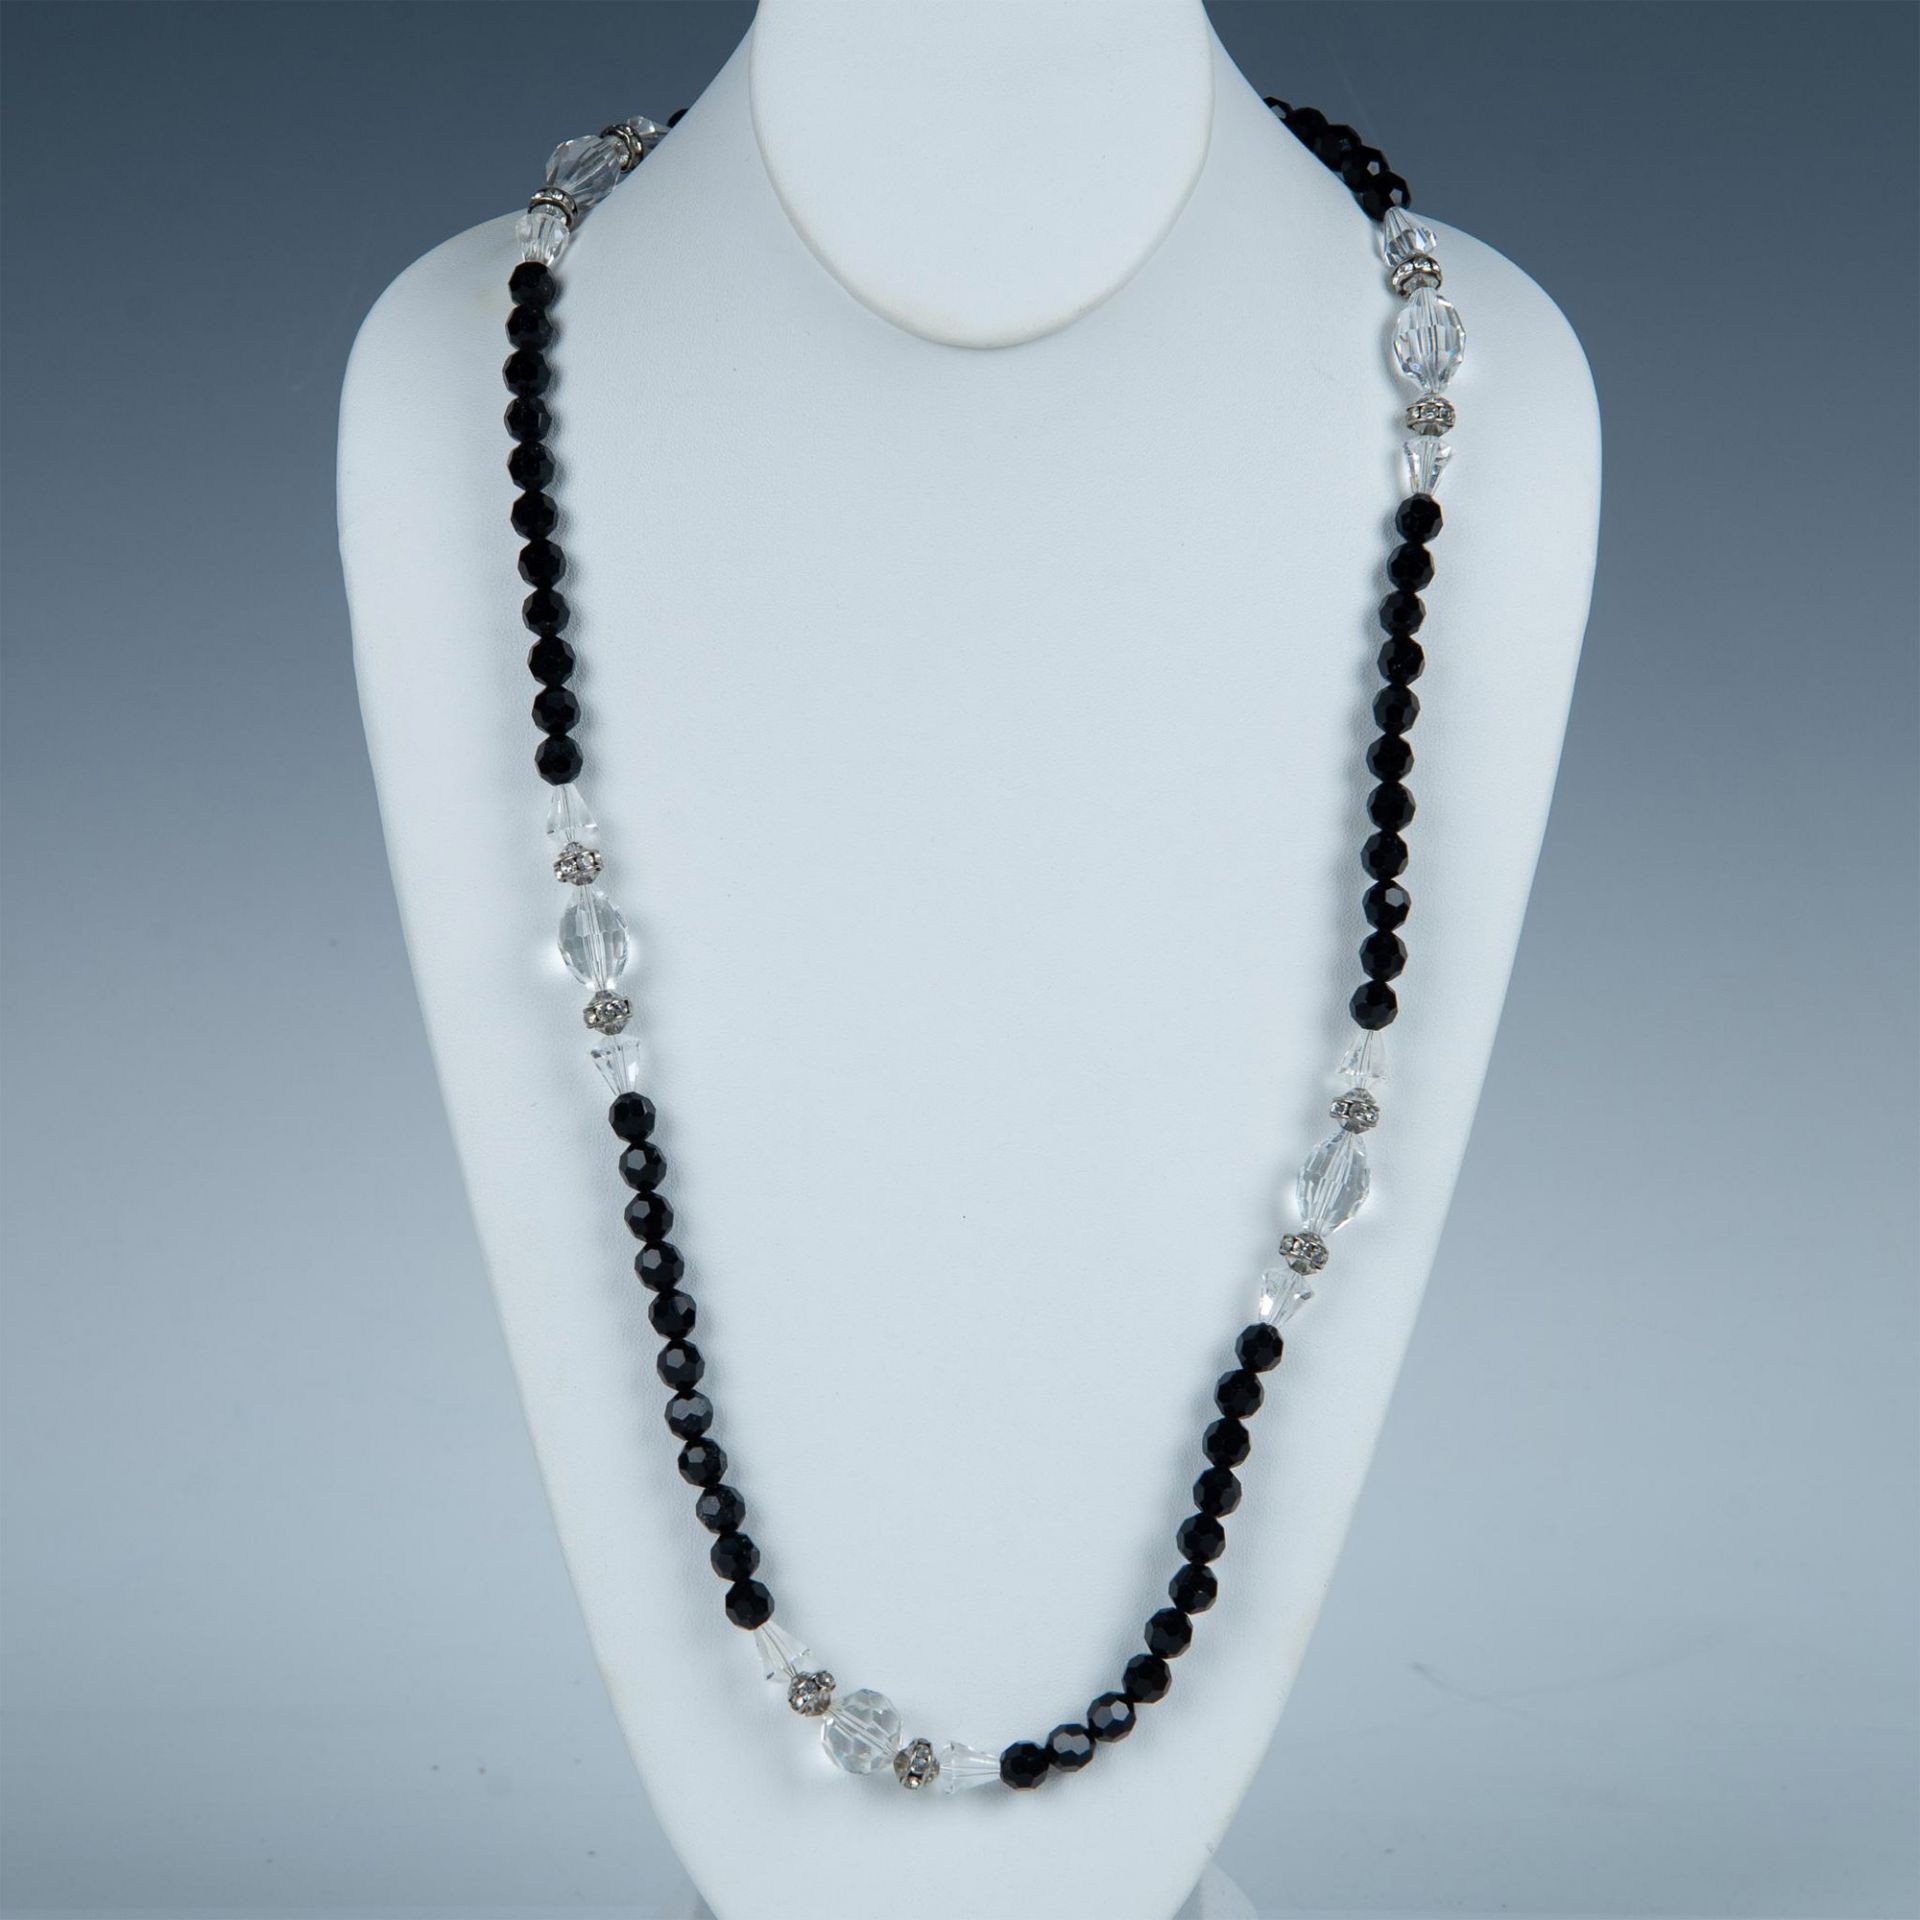 Classy Long Black and Clear Faceted Bead Necklace